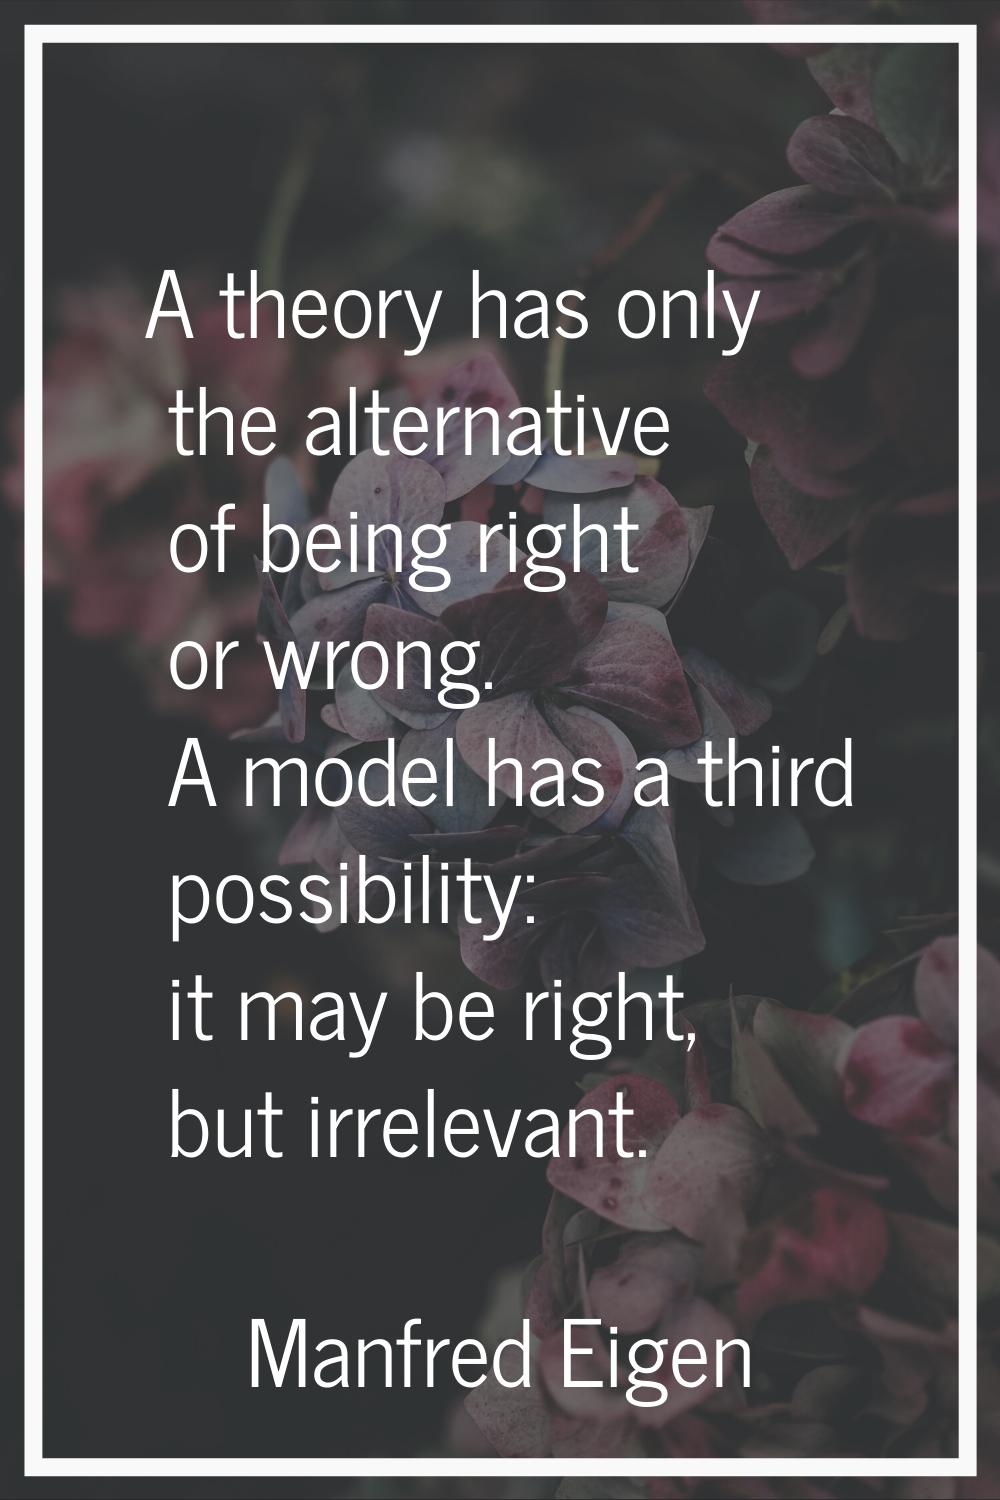 A theory has only the alternative of being right or wrong. A model has a third possibility: it may 